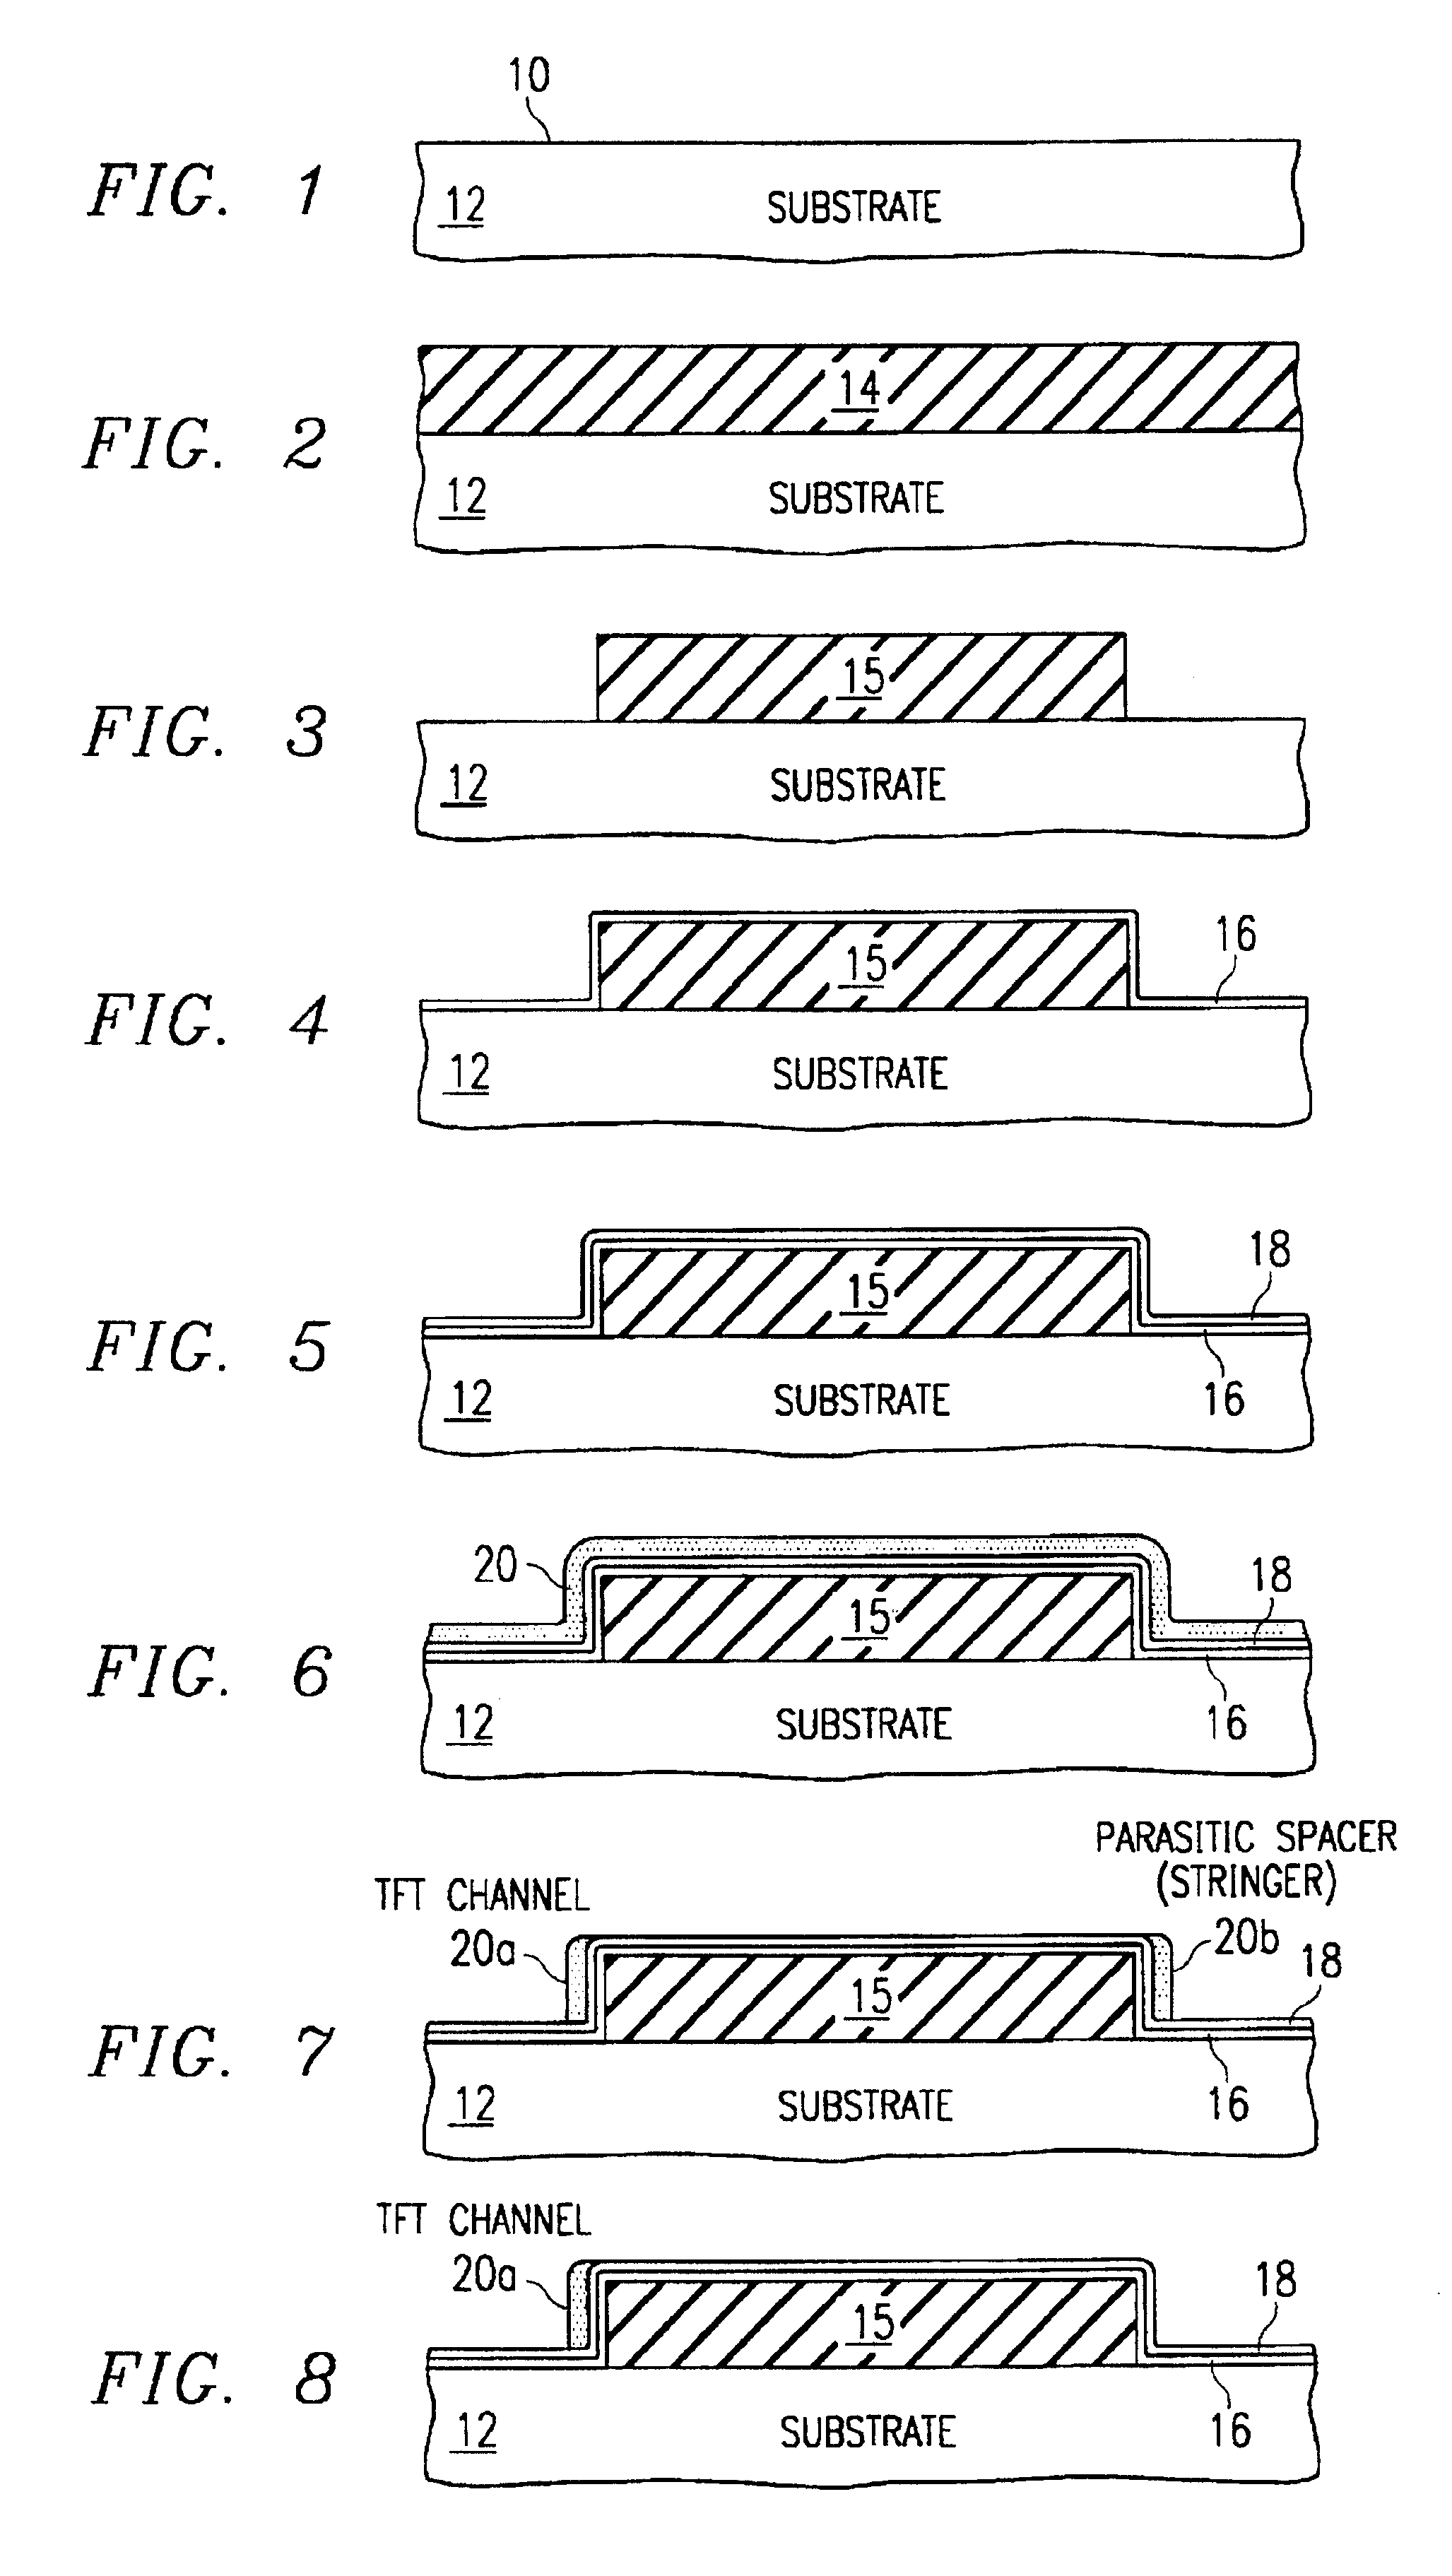 Spacer-type thin-film polysilicon transistor for low-power memory devices